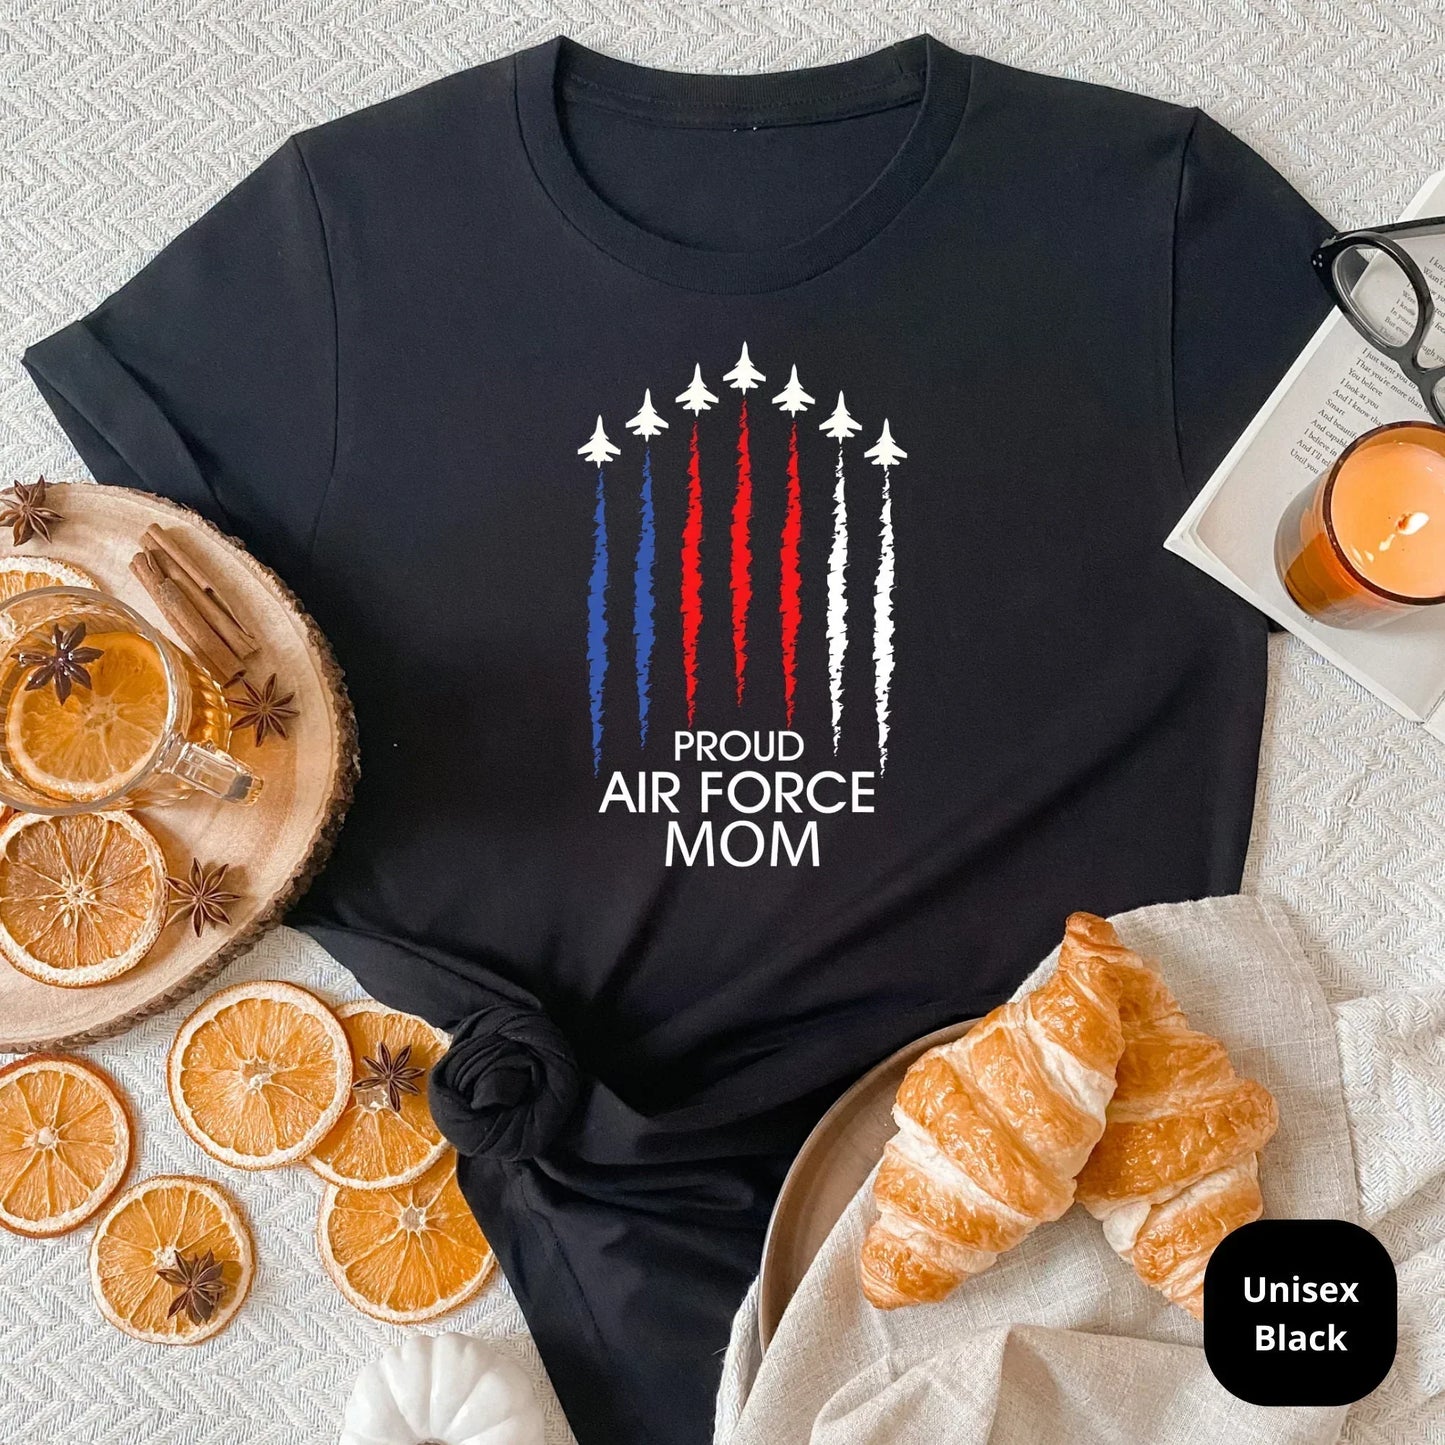 Air Force Mom Shirt, Air force Wife Tee, Military Mom T-Shirt, Military Wife Sweatshirt, Mom Gift, Support our troops, USAF Mom, Homecoming HMDesignStudioUS